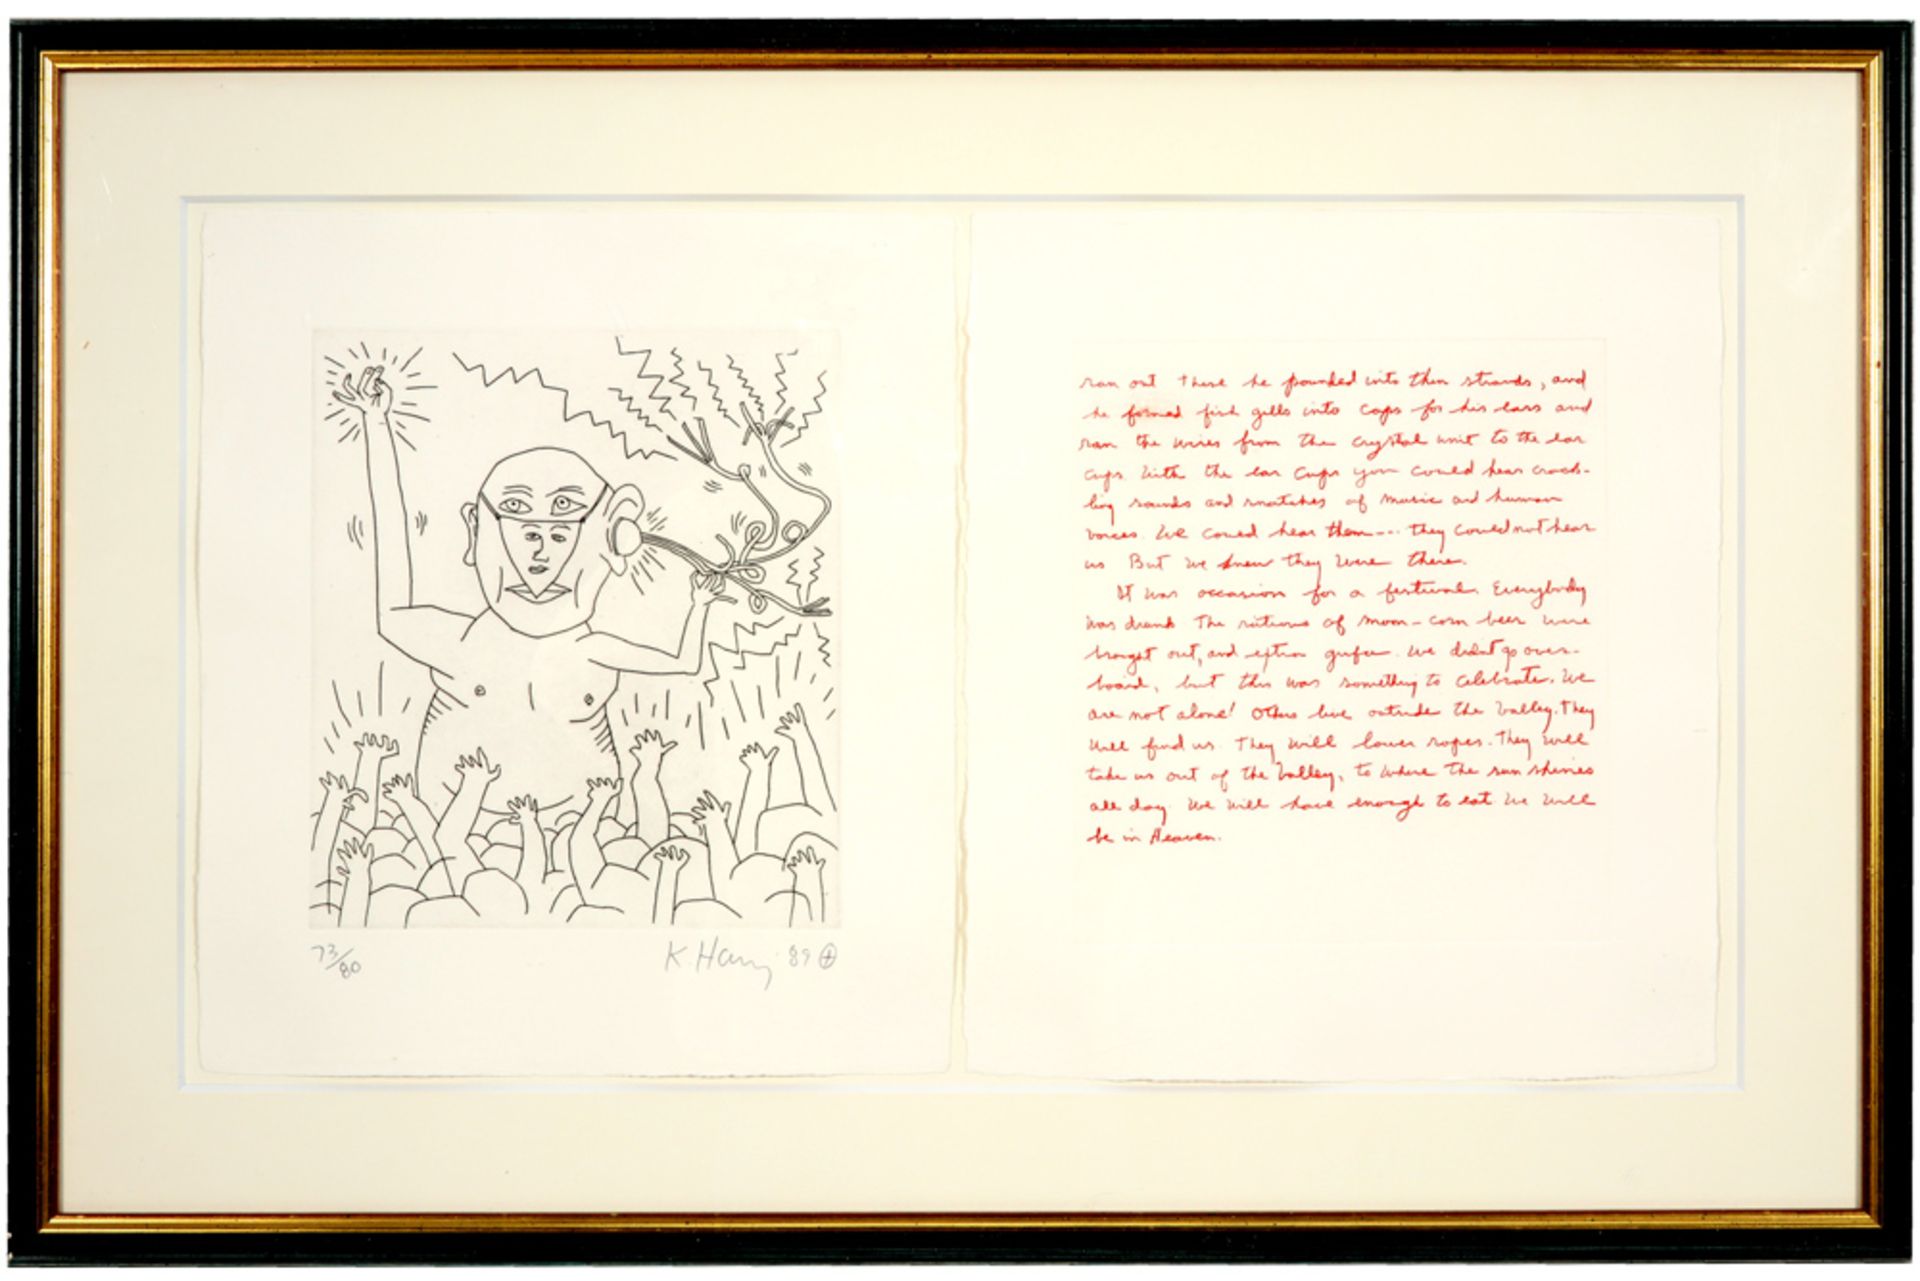 Keith Haring signed "The Valley" etching on Twincrocker paper - framed with a sheet with scripture